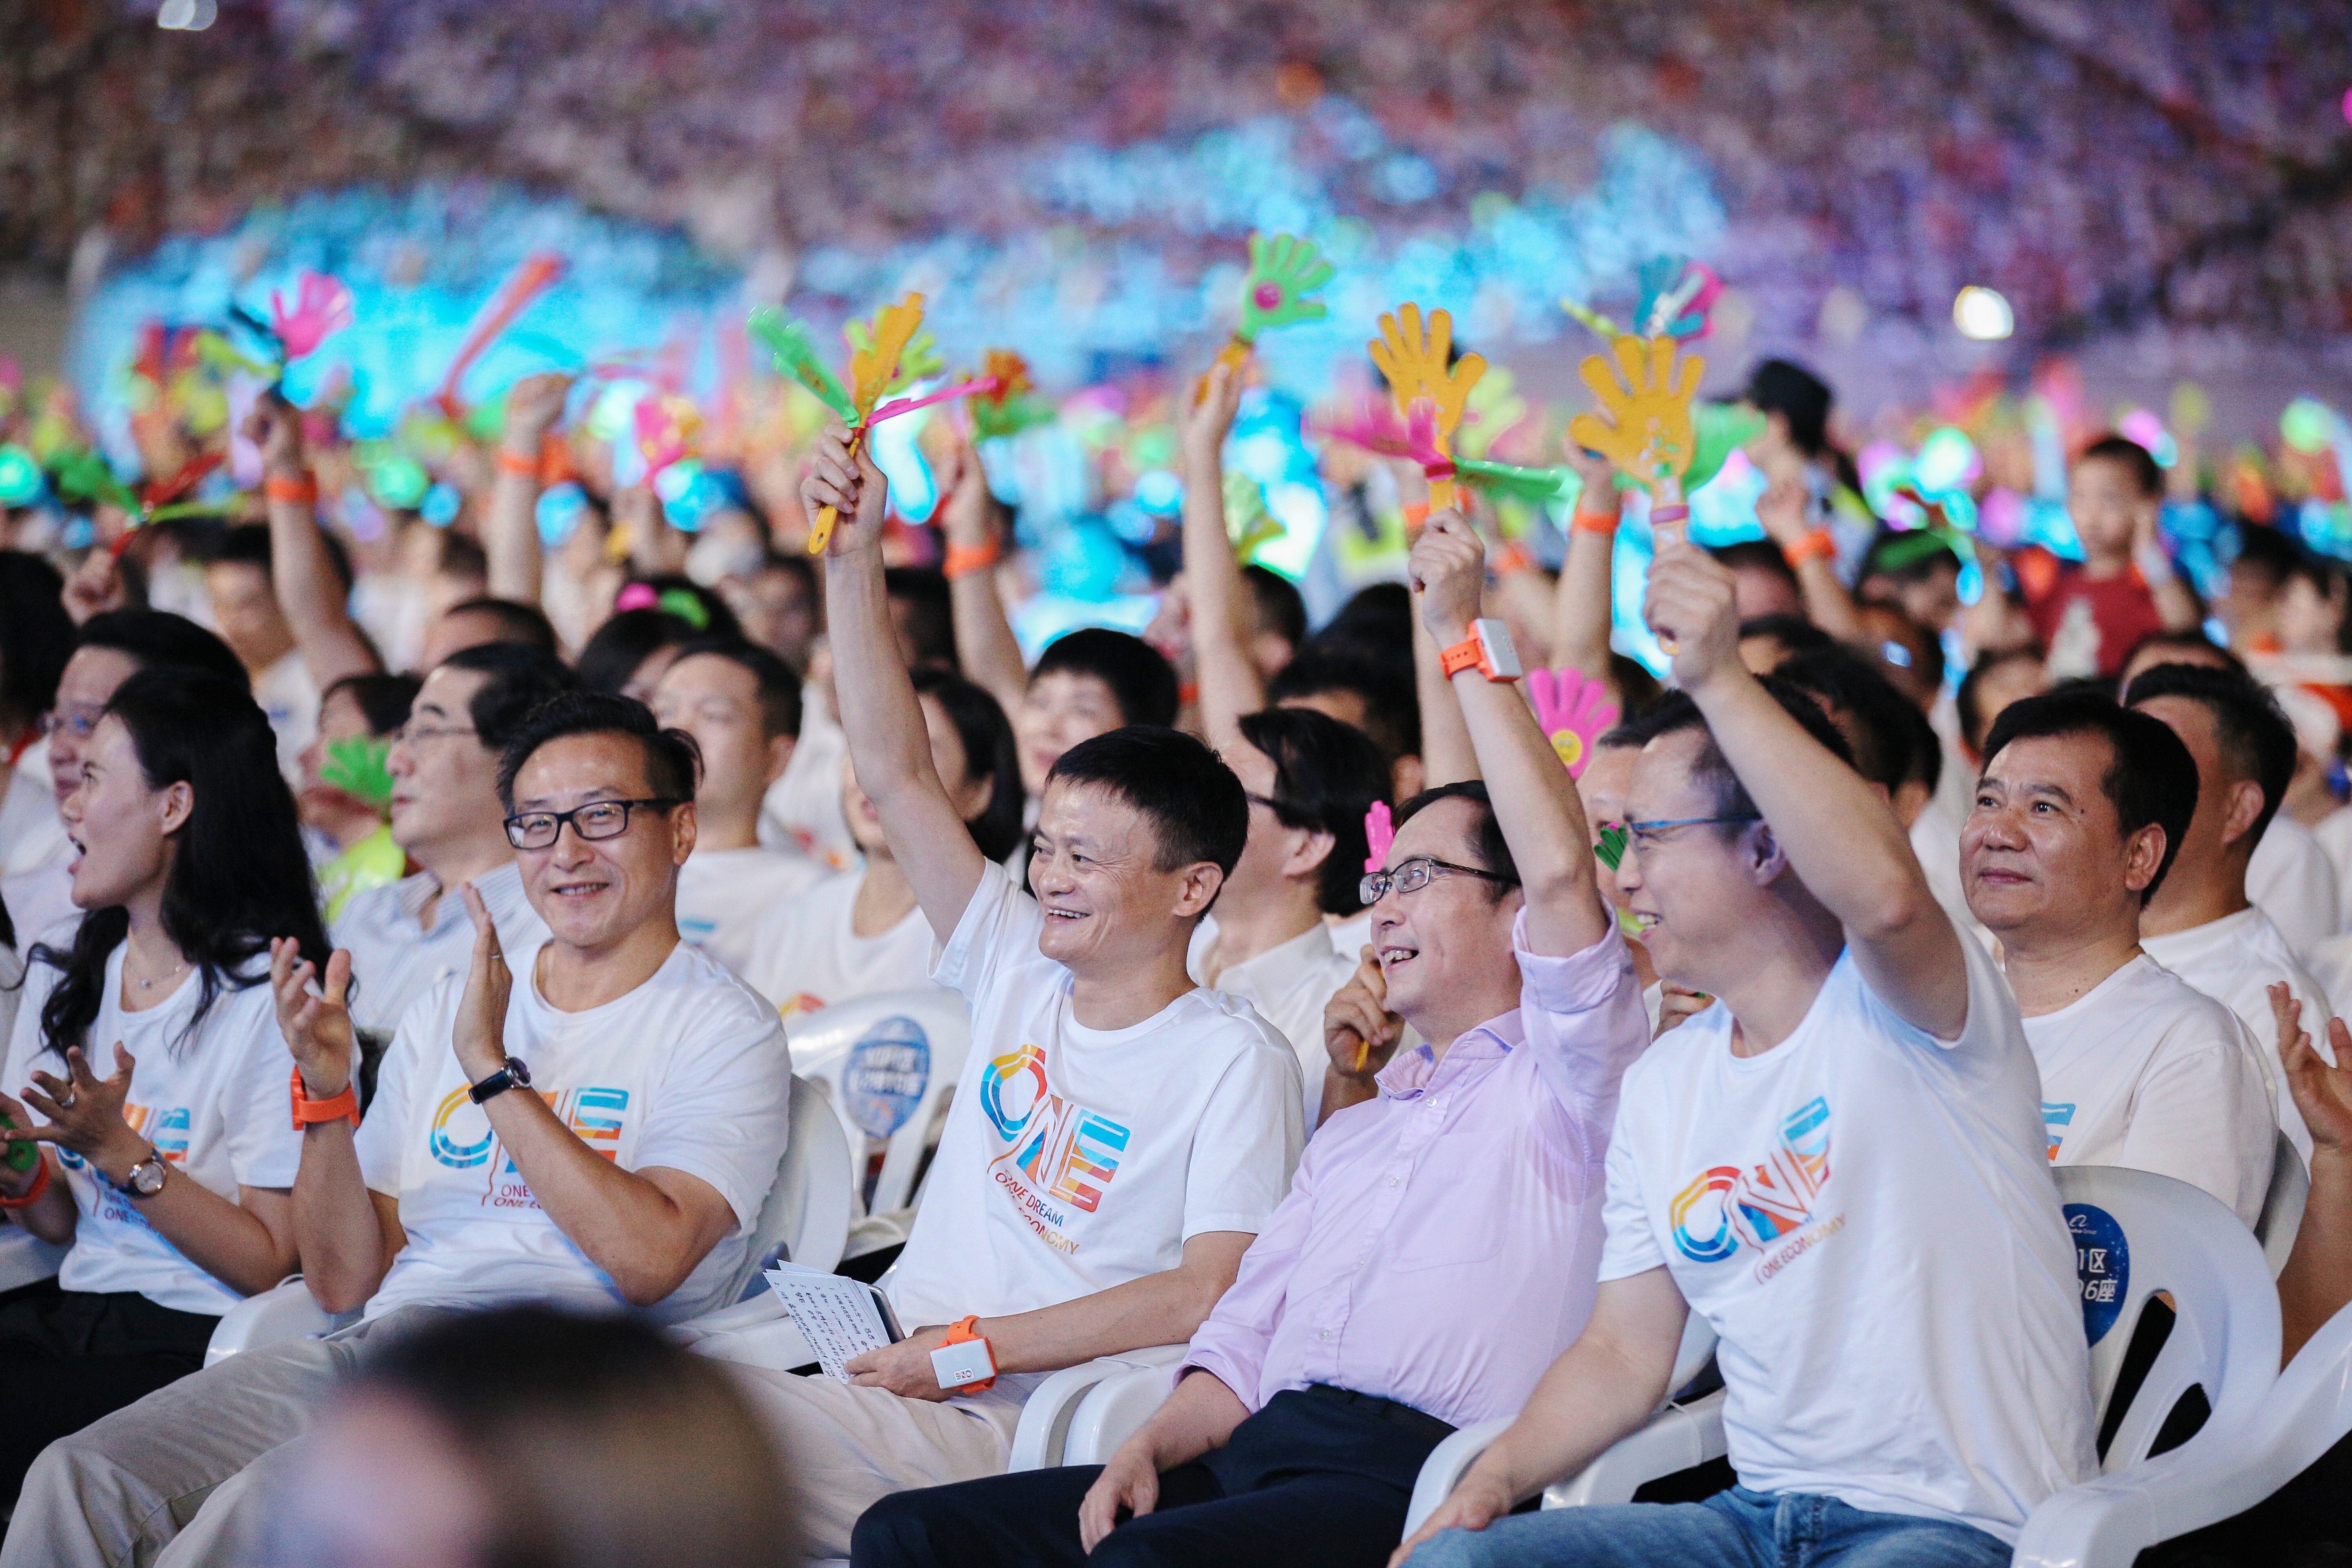 Alibaba Group Holding’s senior executives Joe Tsai (left), Jack Ma (centre) and Daniel Zhang (second right) during a company event in 2018. Photo: Handout